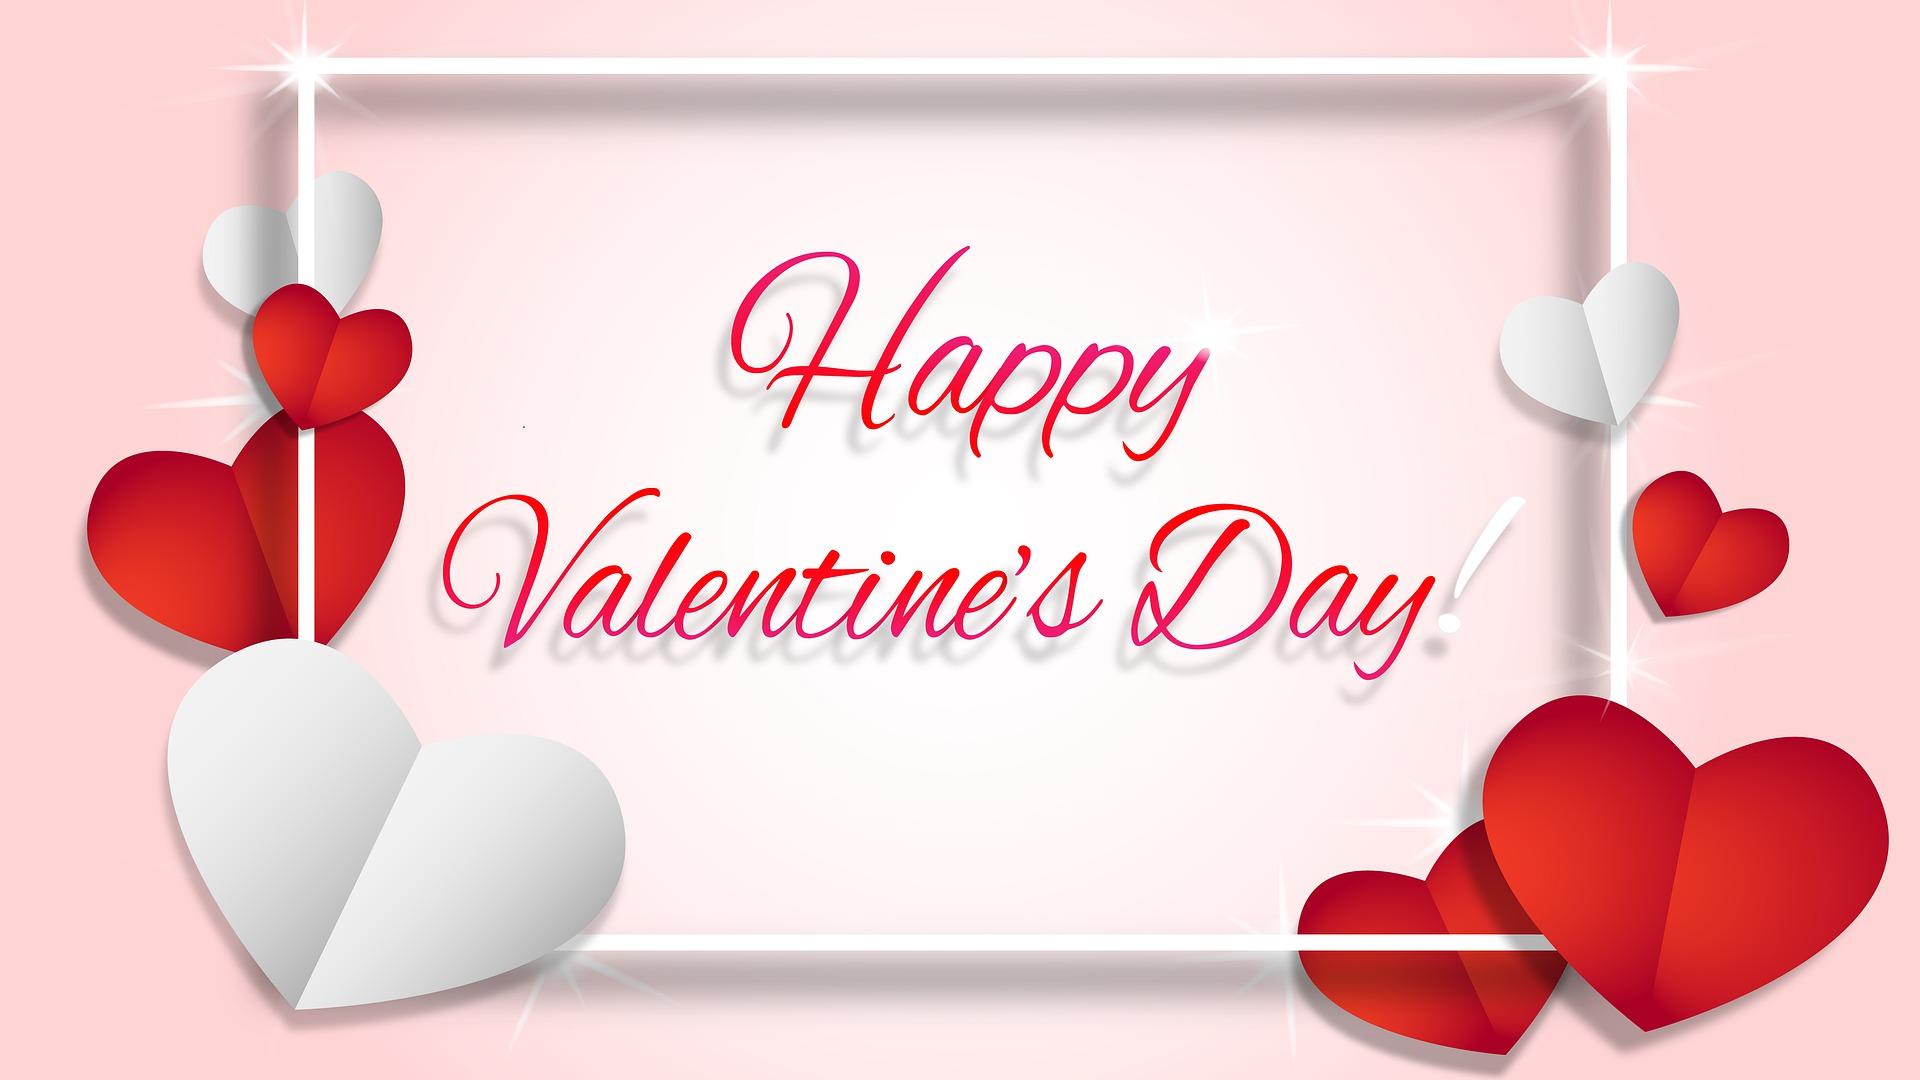 Valentines Day 2020: Valentines Day image, Card, Quotes & Gift Ideas